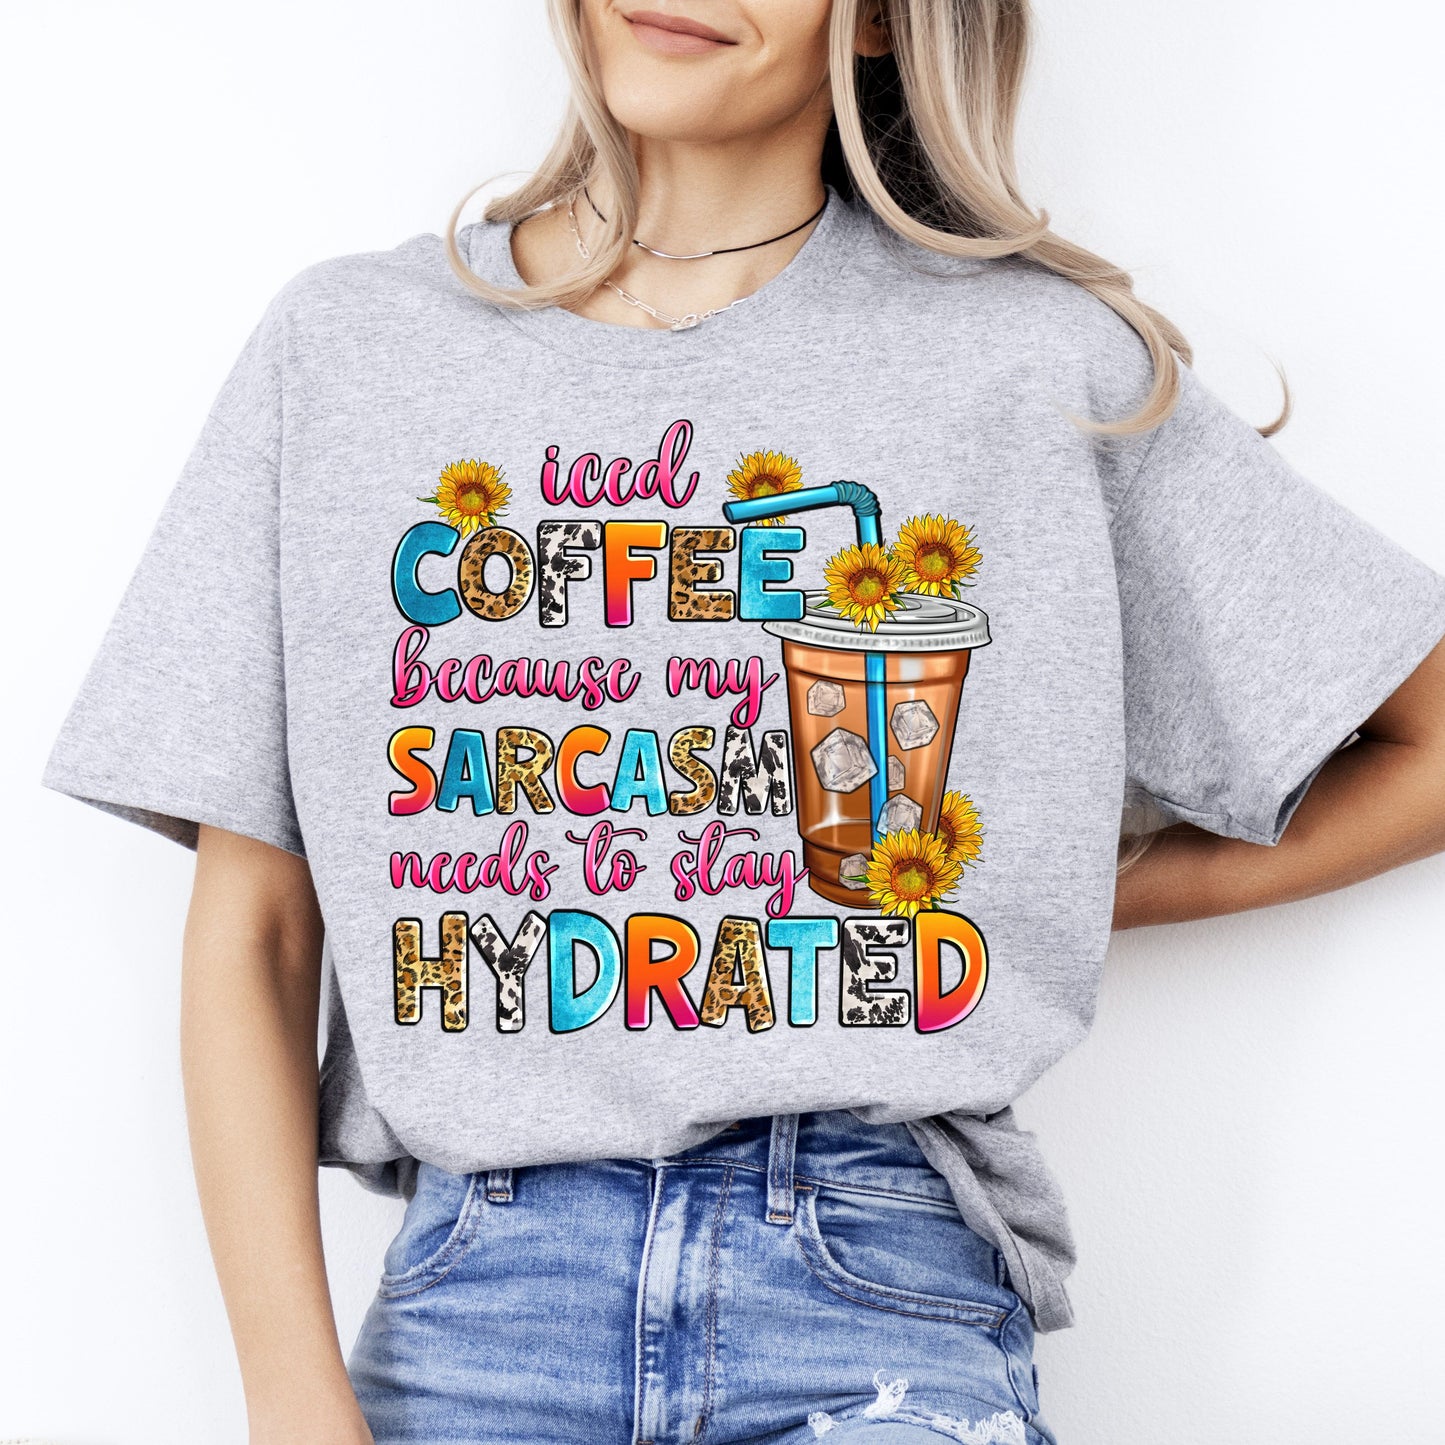 Iced coffee because my sarcasm needs to stay hydrated T-Shirt sarcastic Unisex Tee Sand White Sport Grey-Sport Grey-Family-Gift-Planet